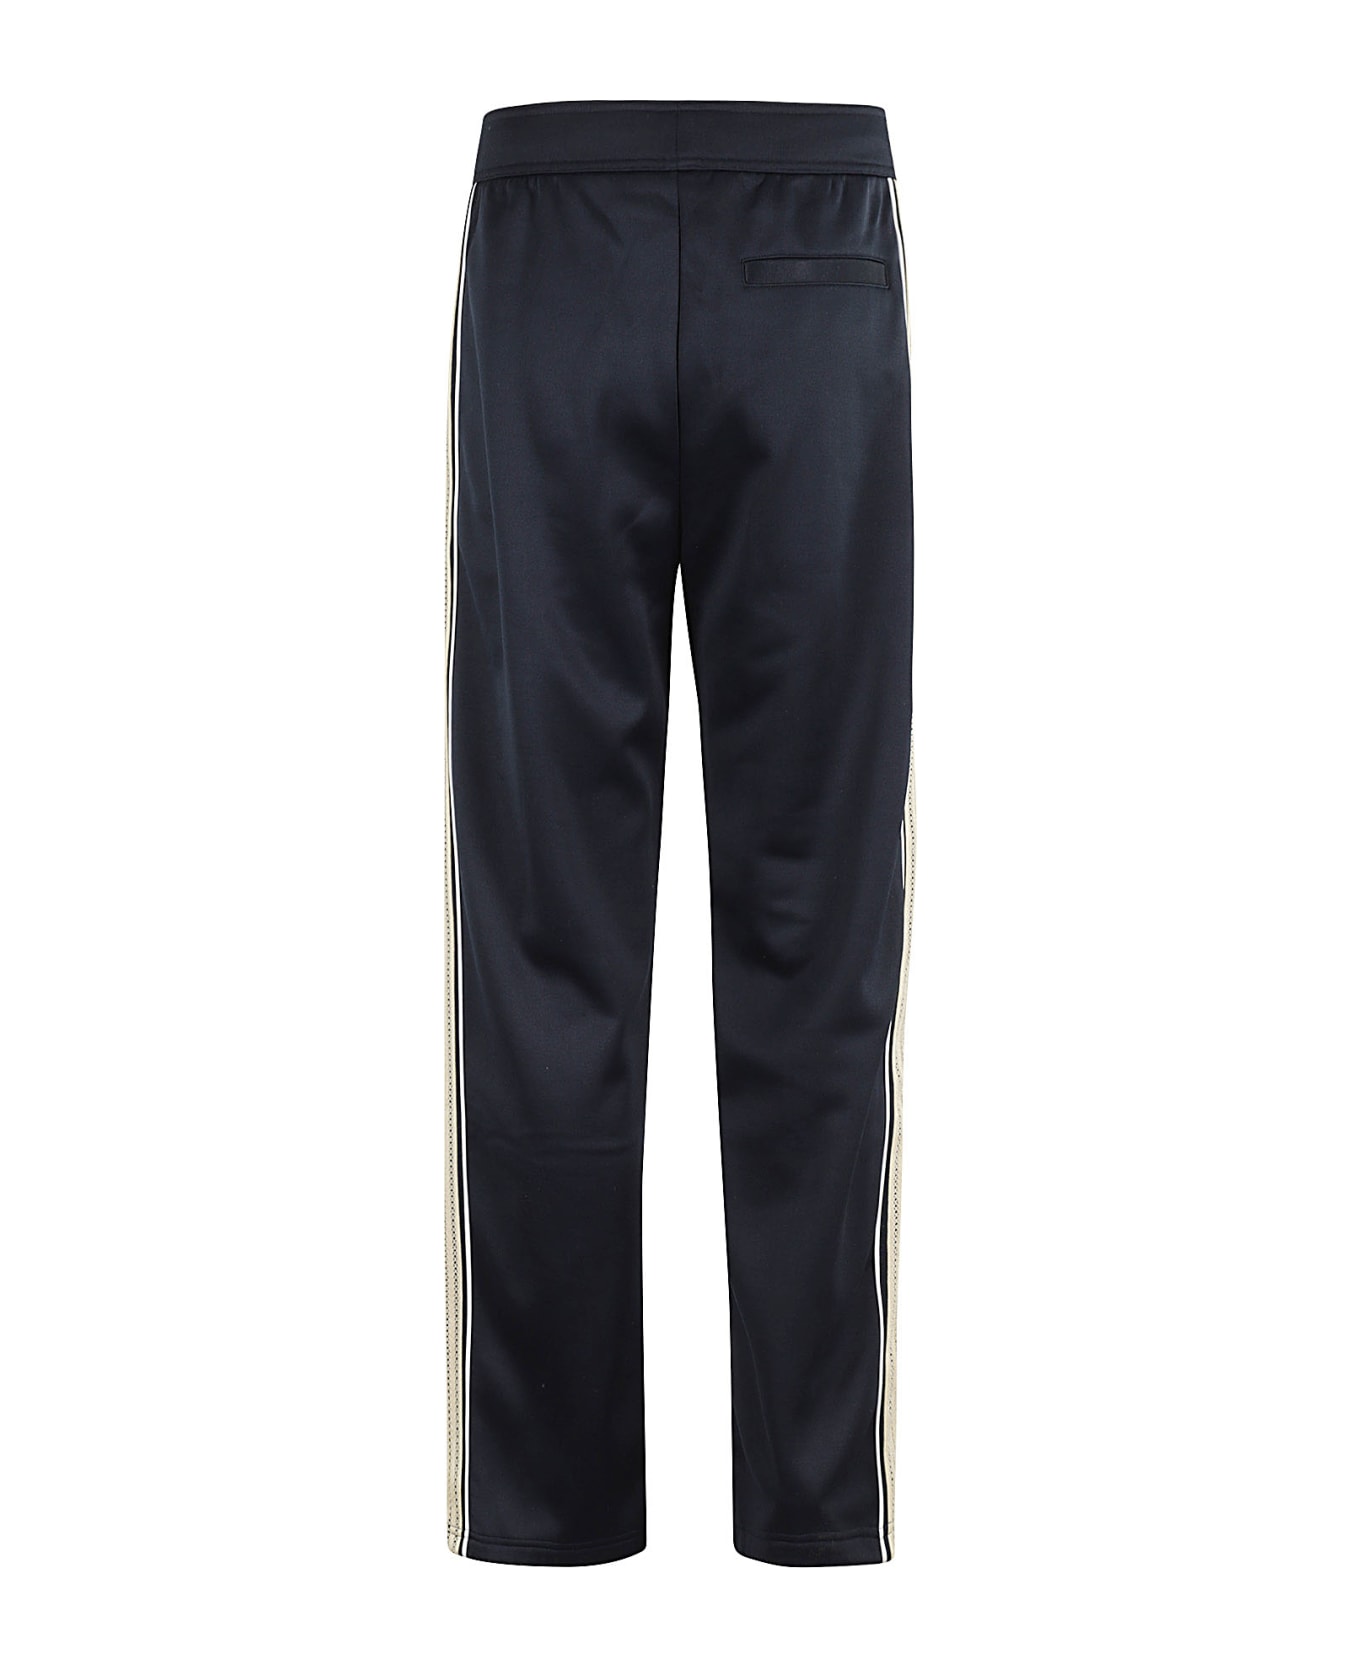 Wales Bonner Mantra Trousers - Navy